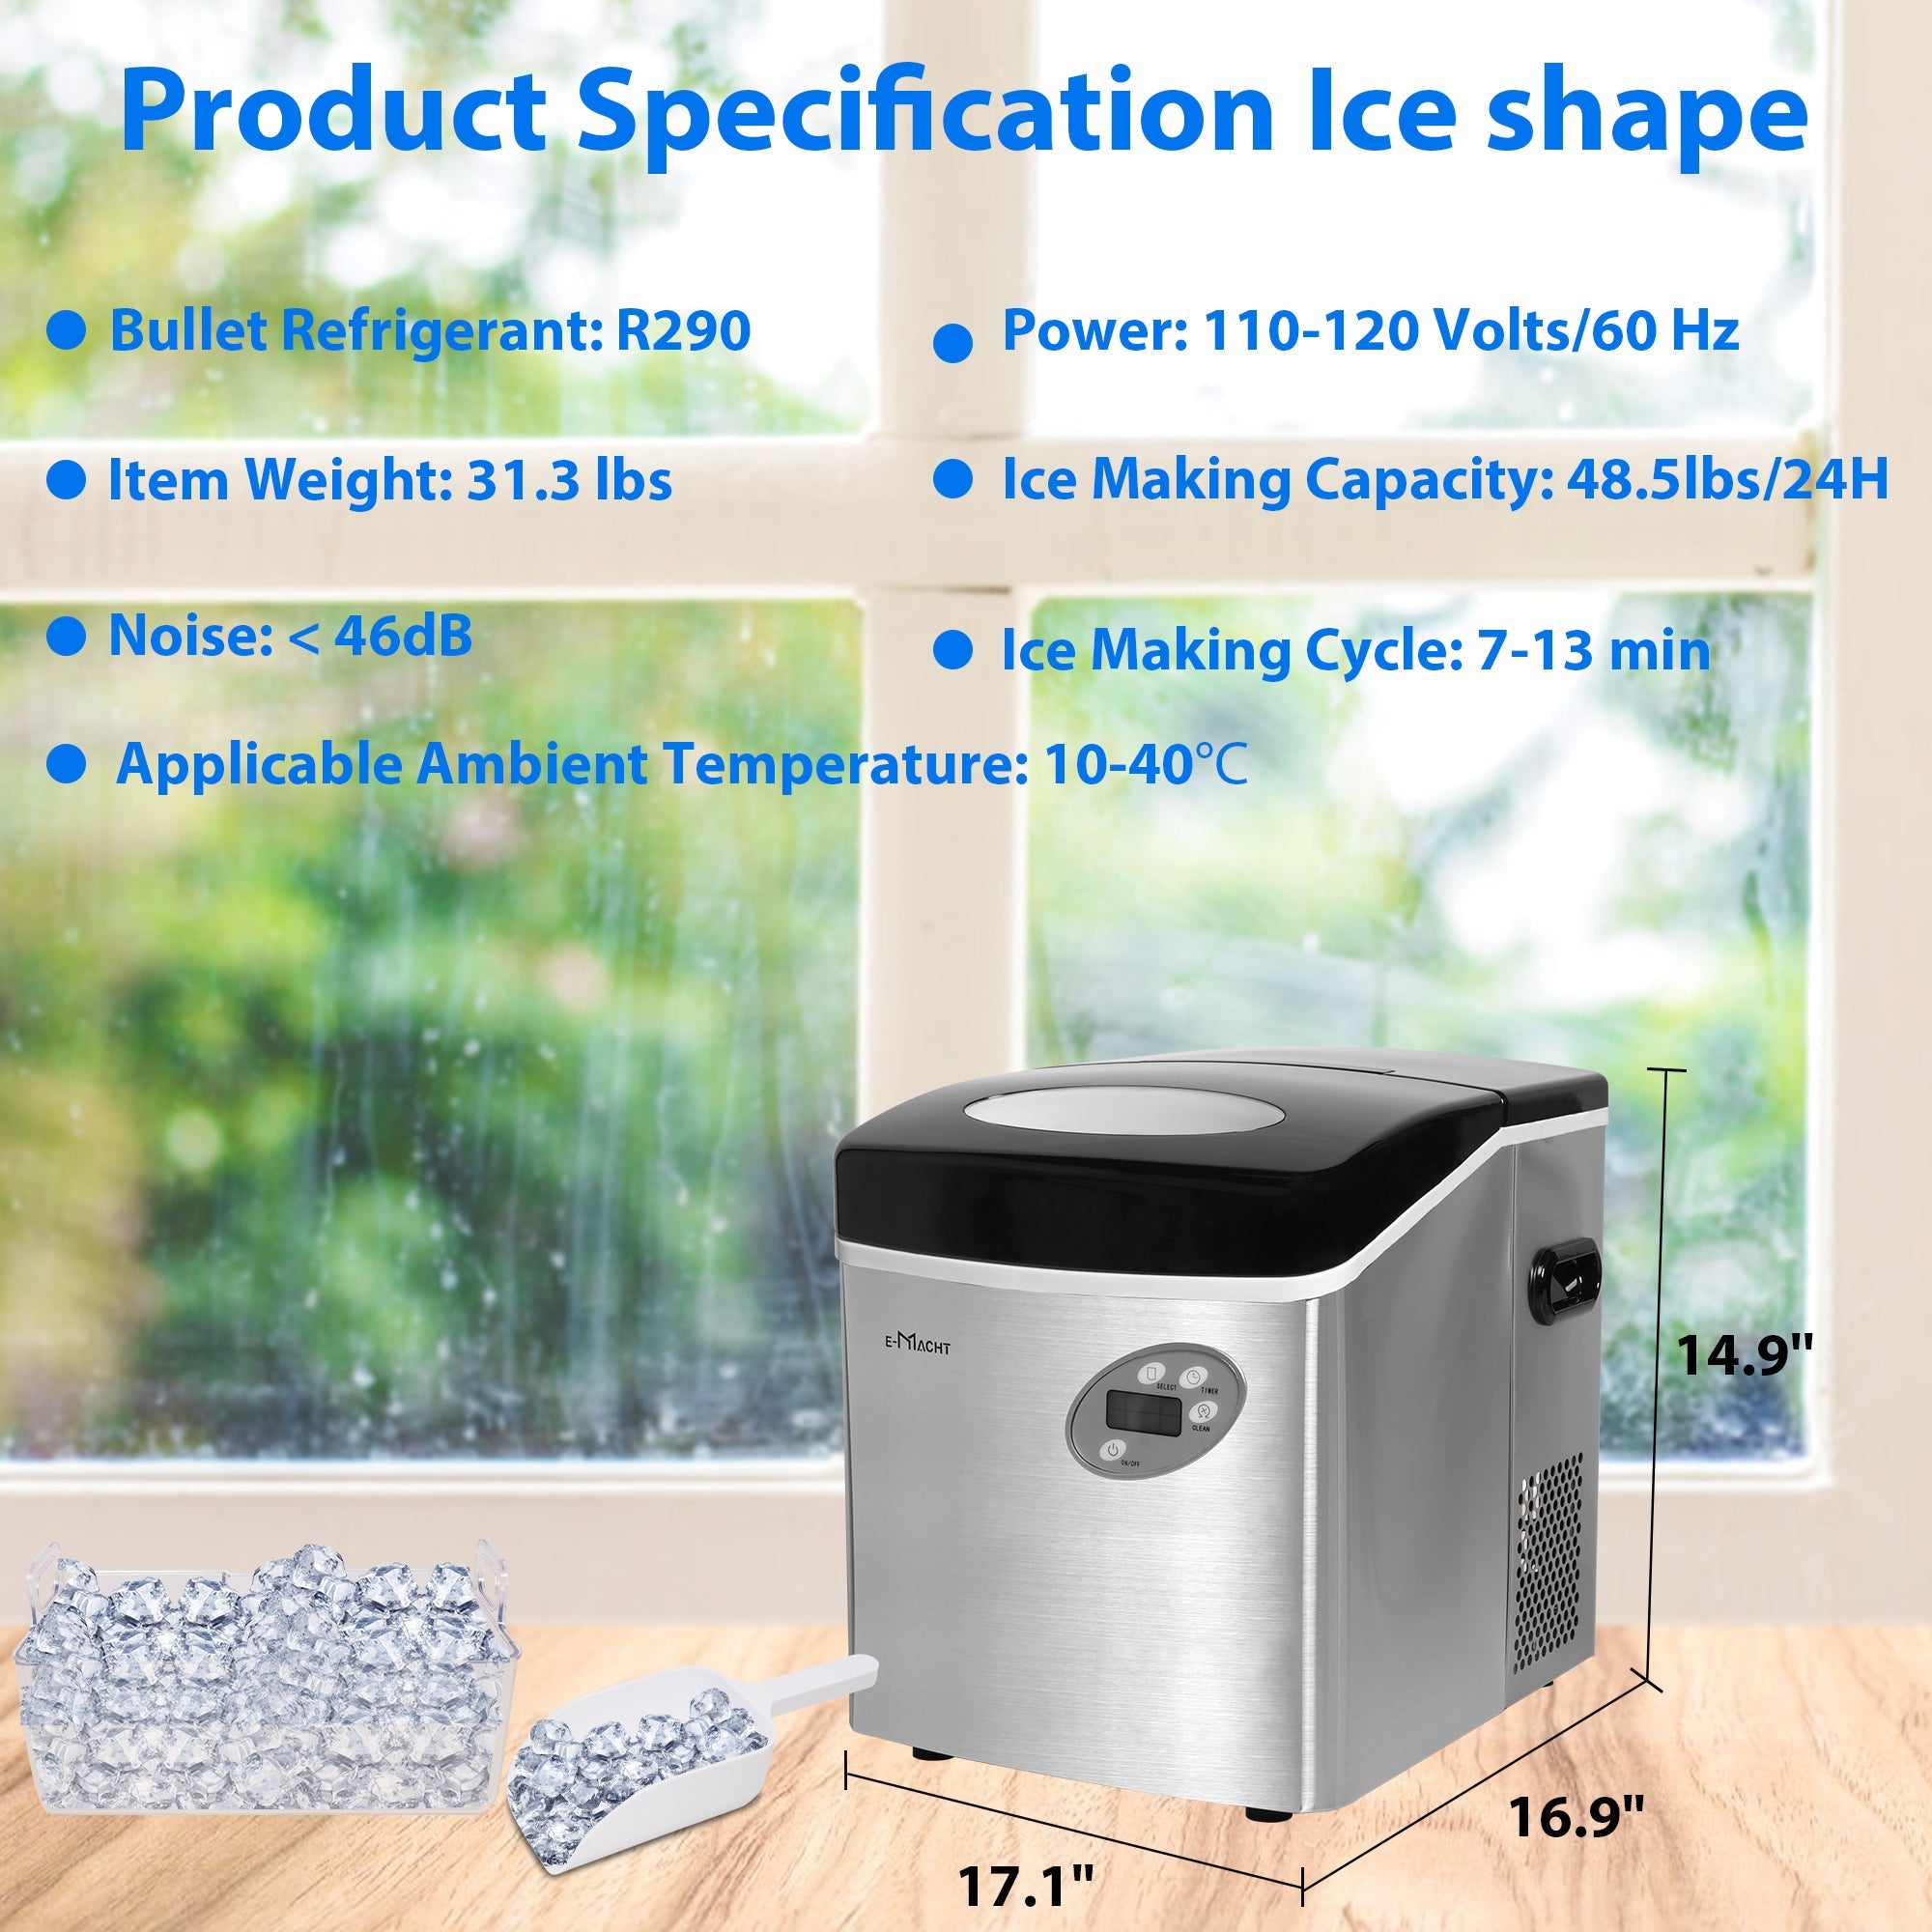 E-Macht Countertop Ice Maker, Self Cleaning, 48.5lbs/24H, Portable Ice Machine with Hand Scoop for Home Kitchen Party Camping